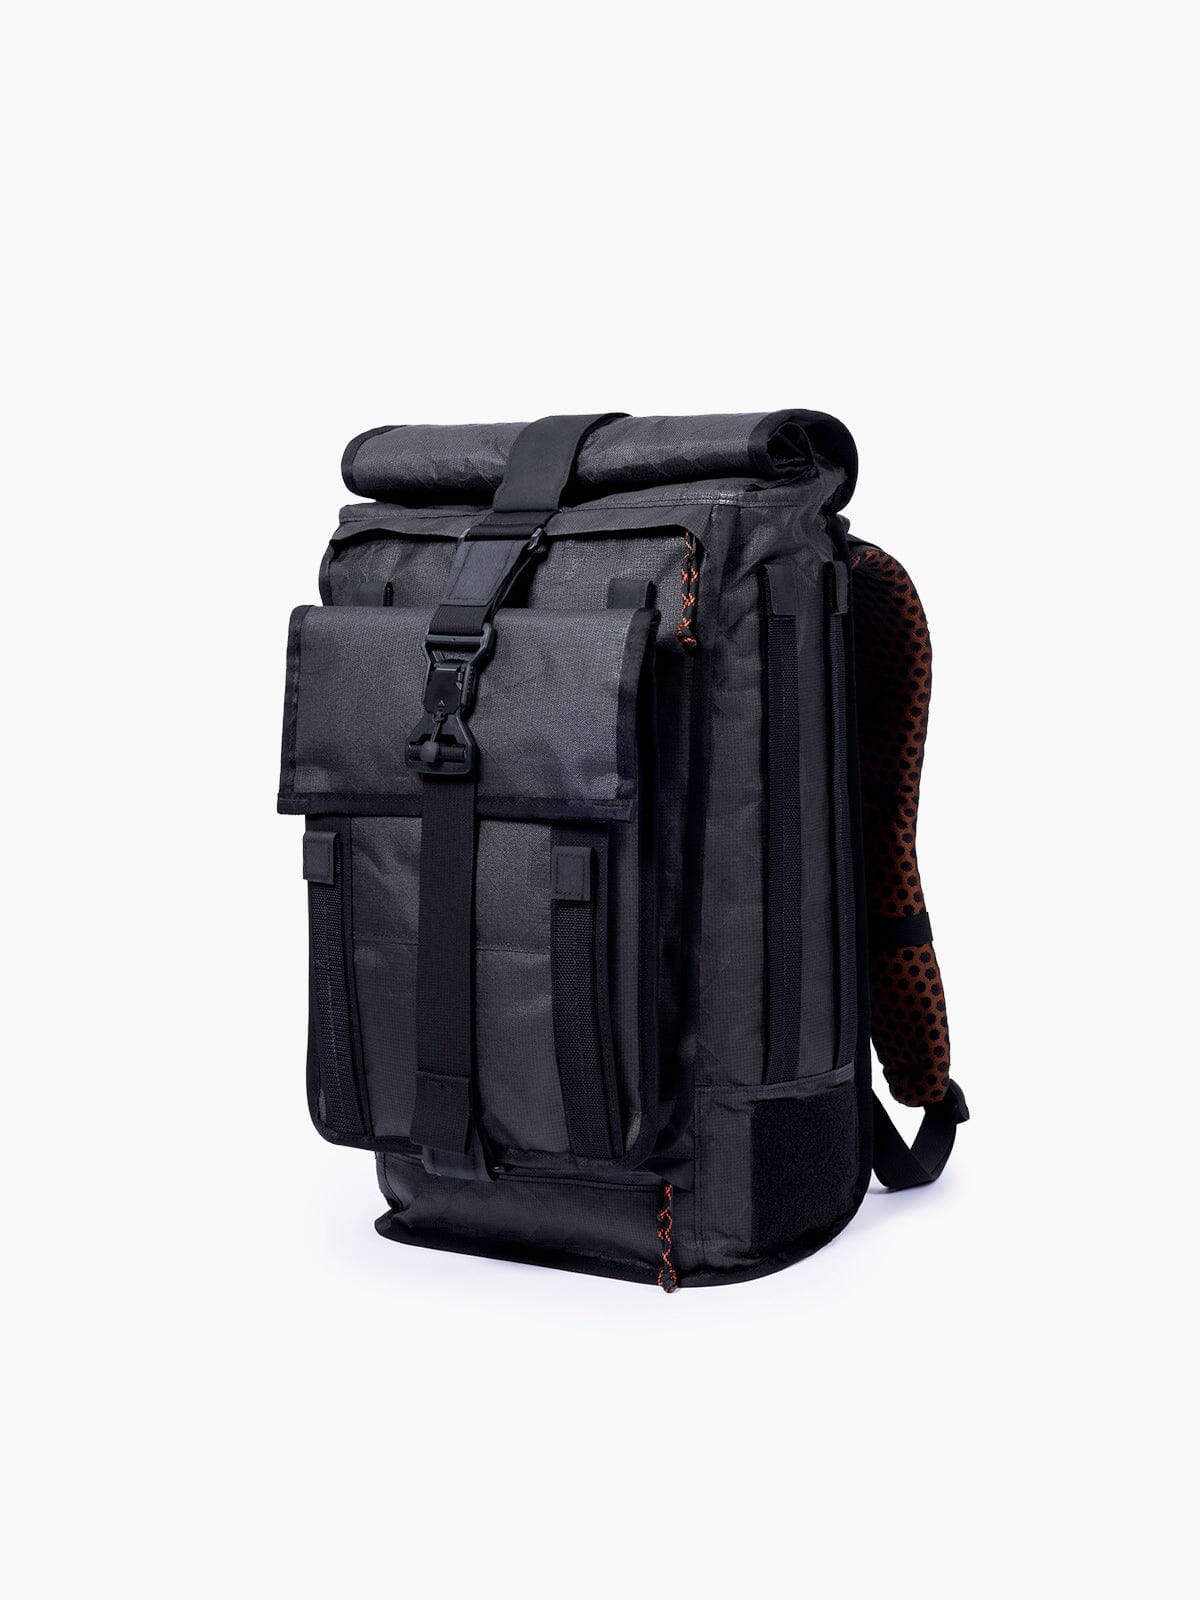 Mission Workshop X Carryology Folio by Mission Workshop - Weatherproof Bags & Technical Apparel - San Francisco & Los Angeles - Built to endure - Guaranteed forever